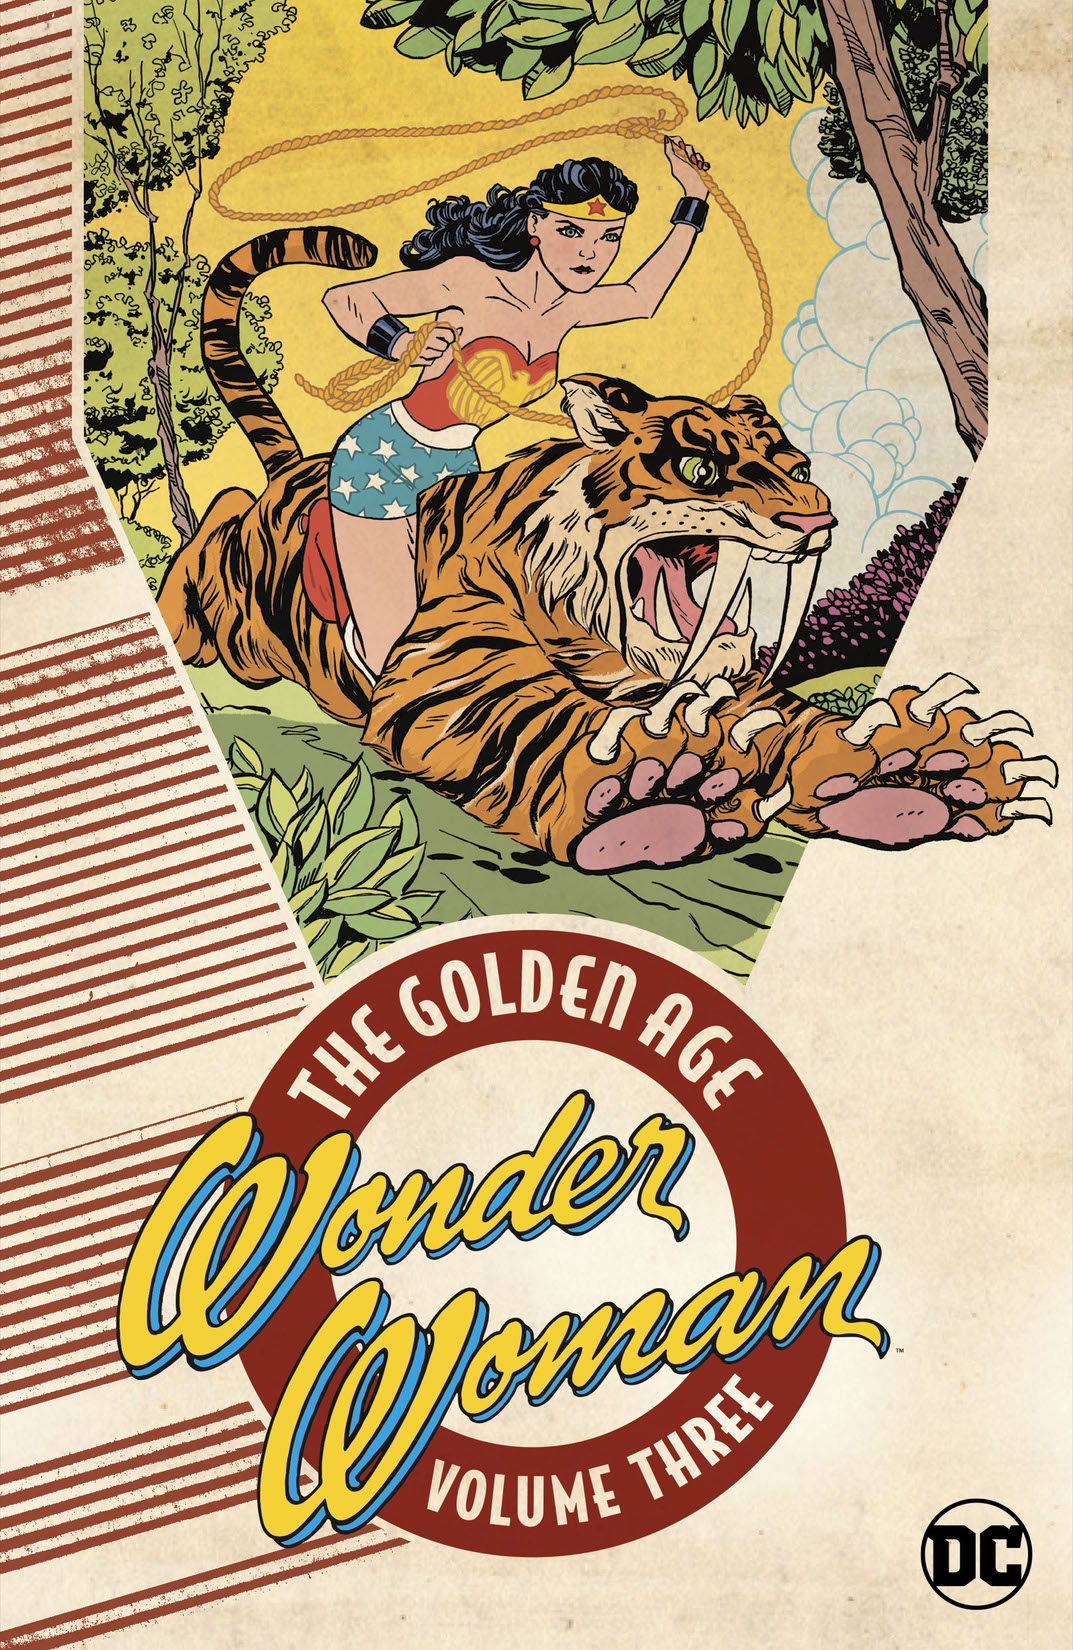 Wonder Woman: The Golden Age Vol. 3 preview images